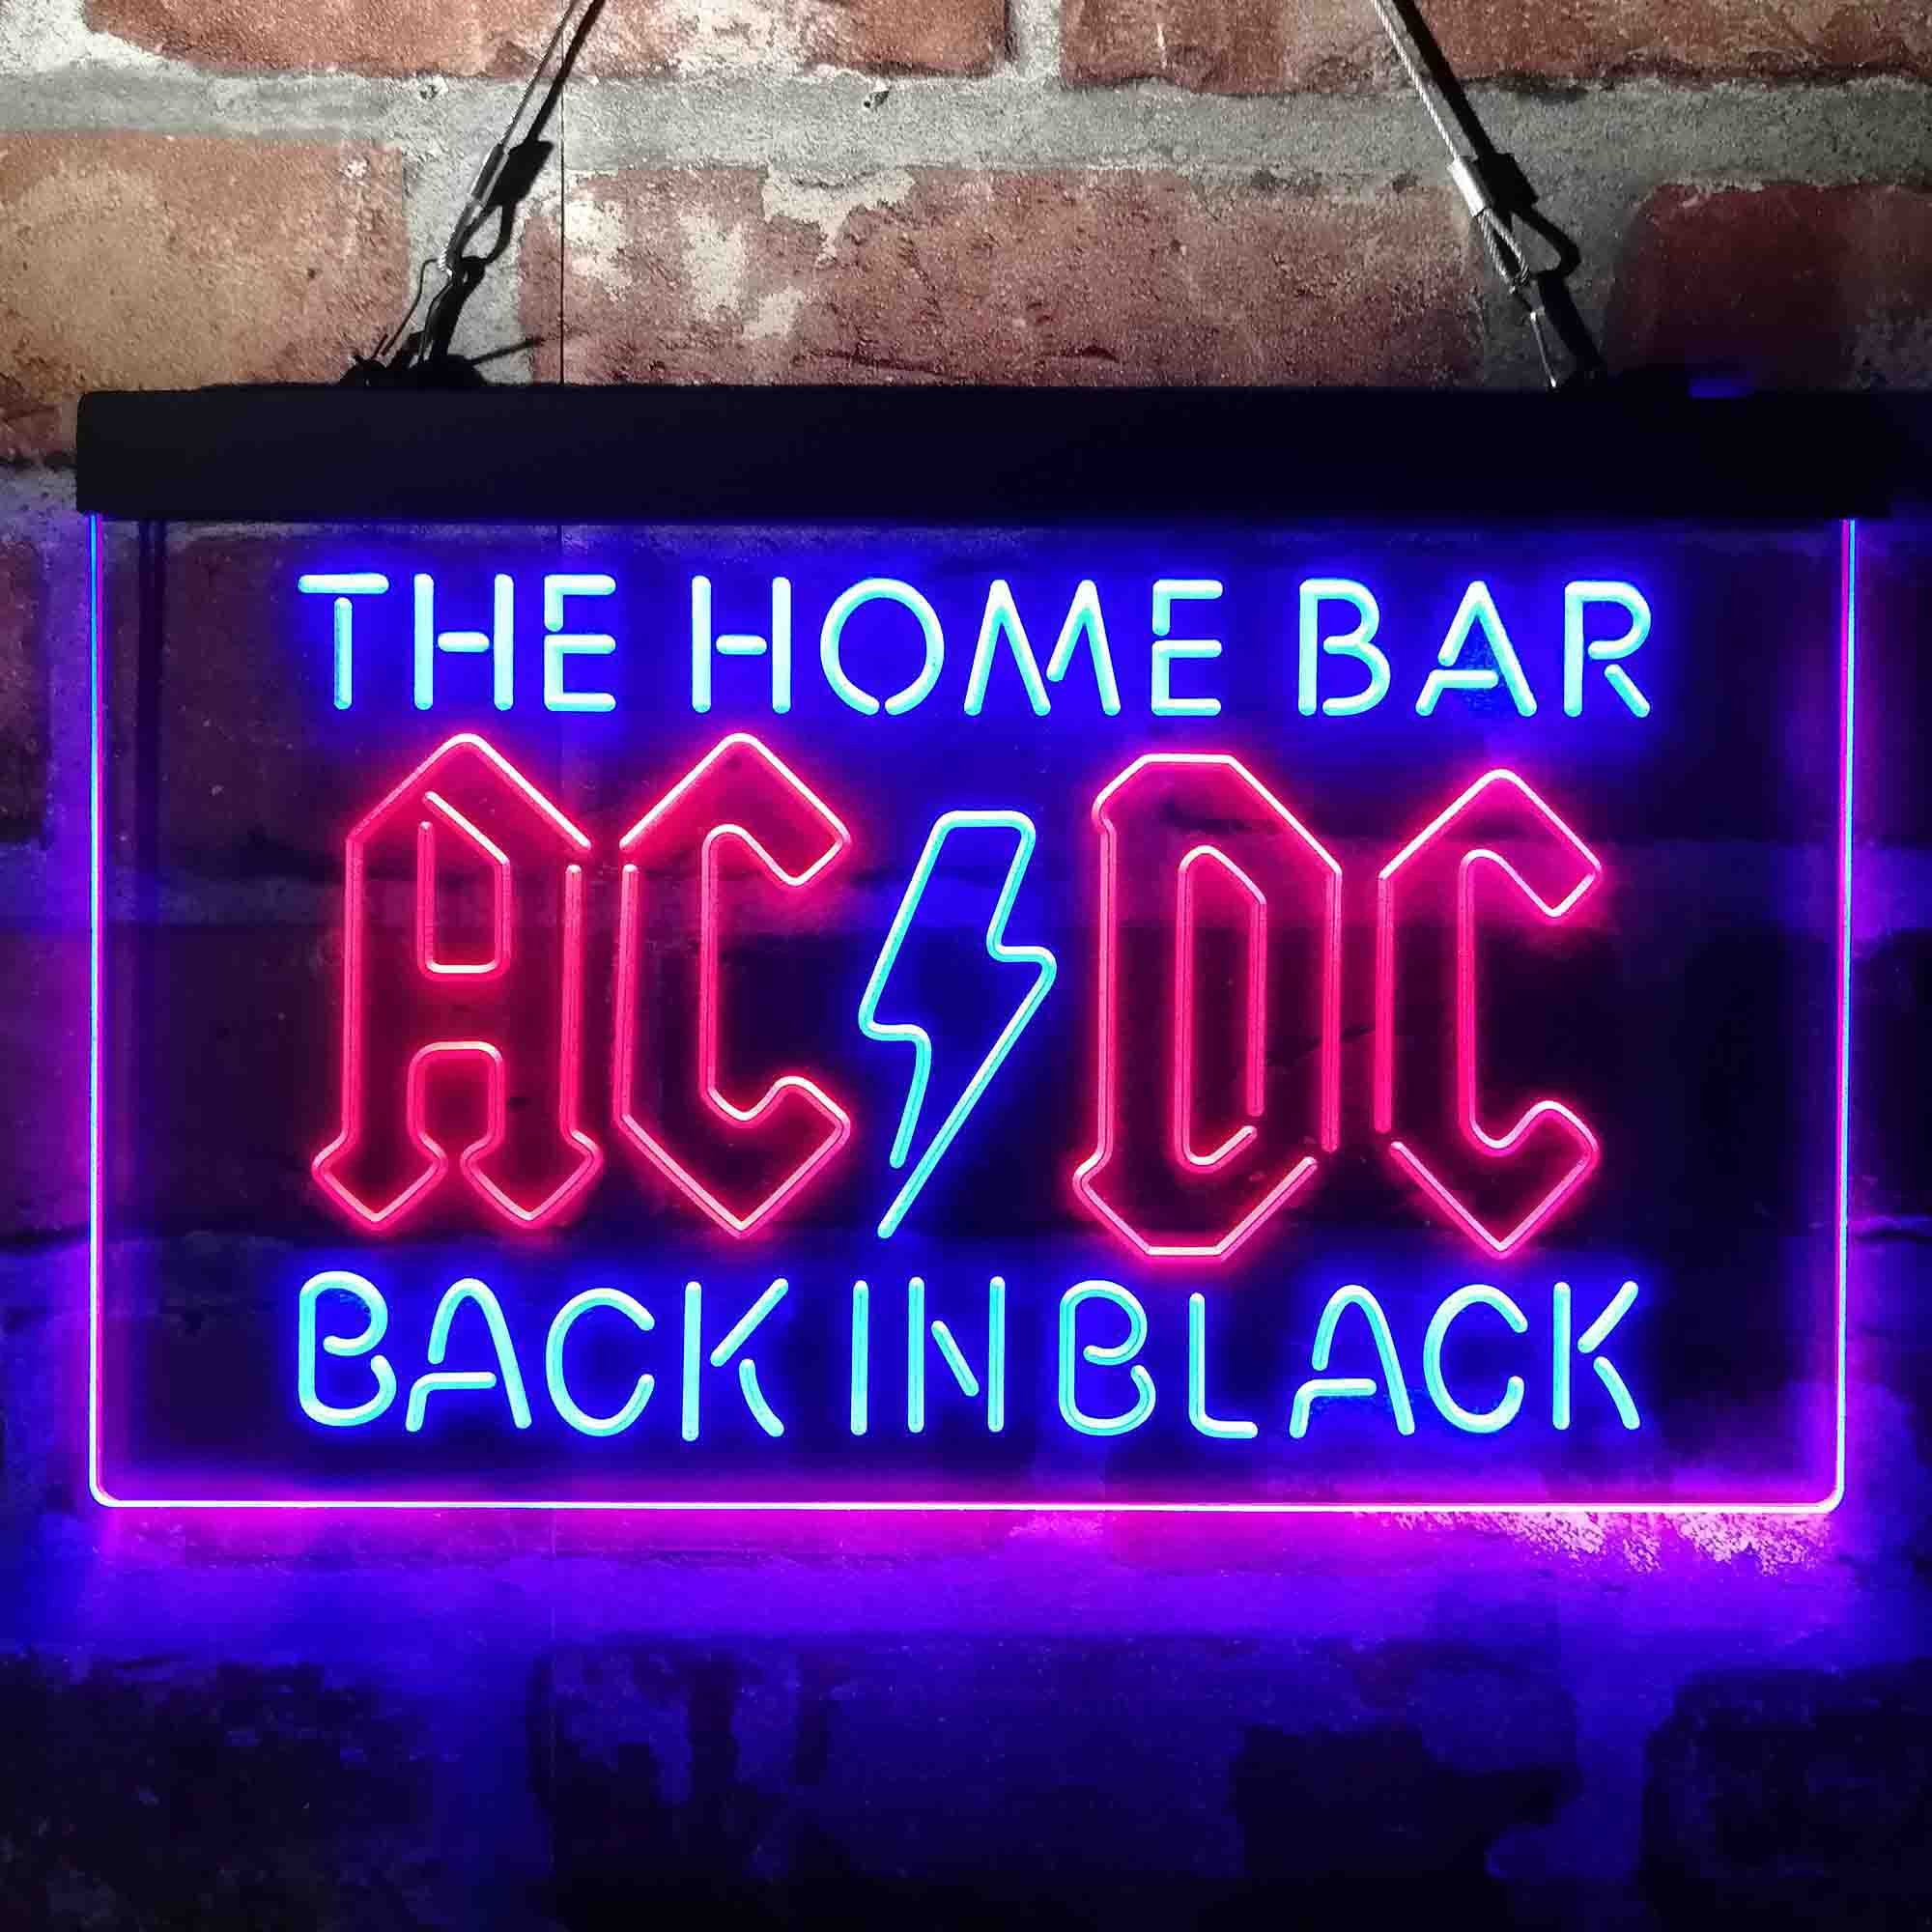 Personalized AC/DC Back in Black Home Bar Neon-Like LED Sign - Custom Wall Decor Gift